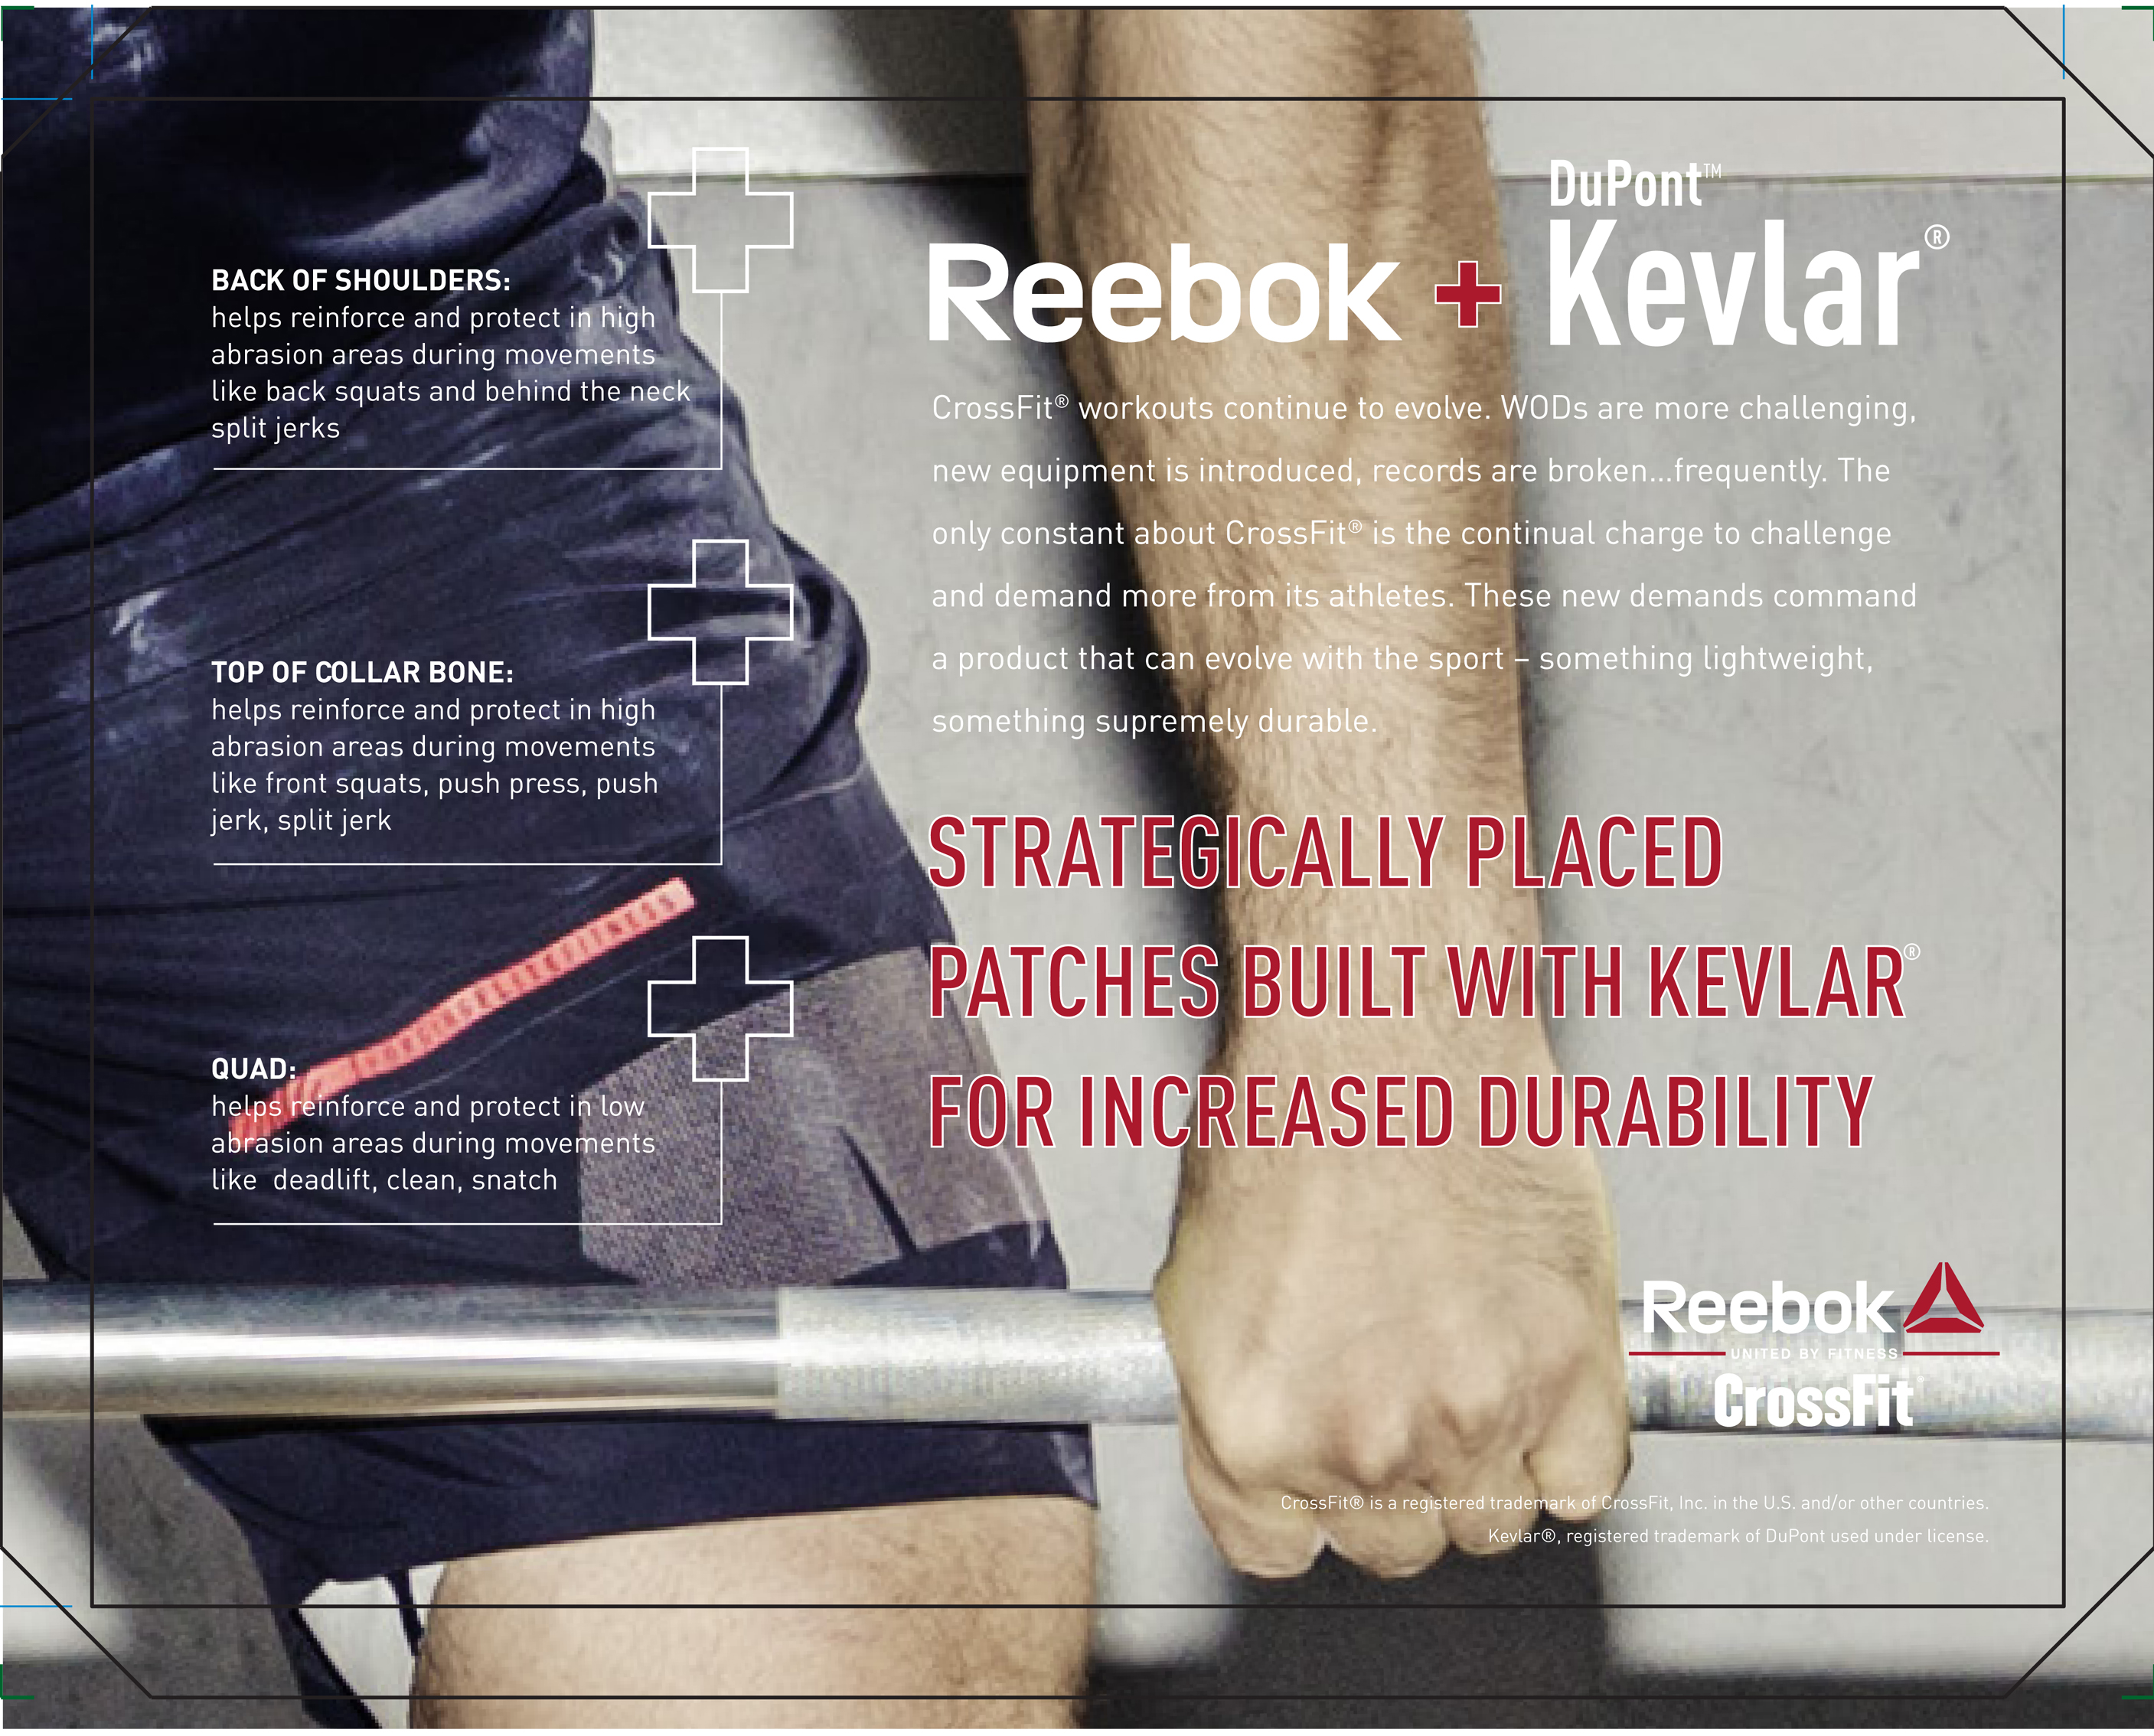 Reebok has woven DuPont™ Kevlar® fiber into strategic patches on key areas on footwear and apparel.